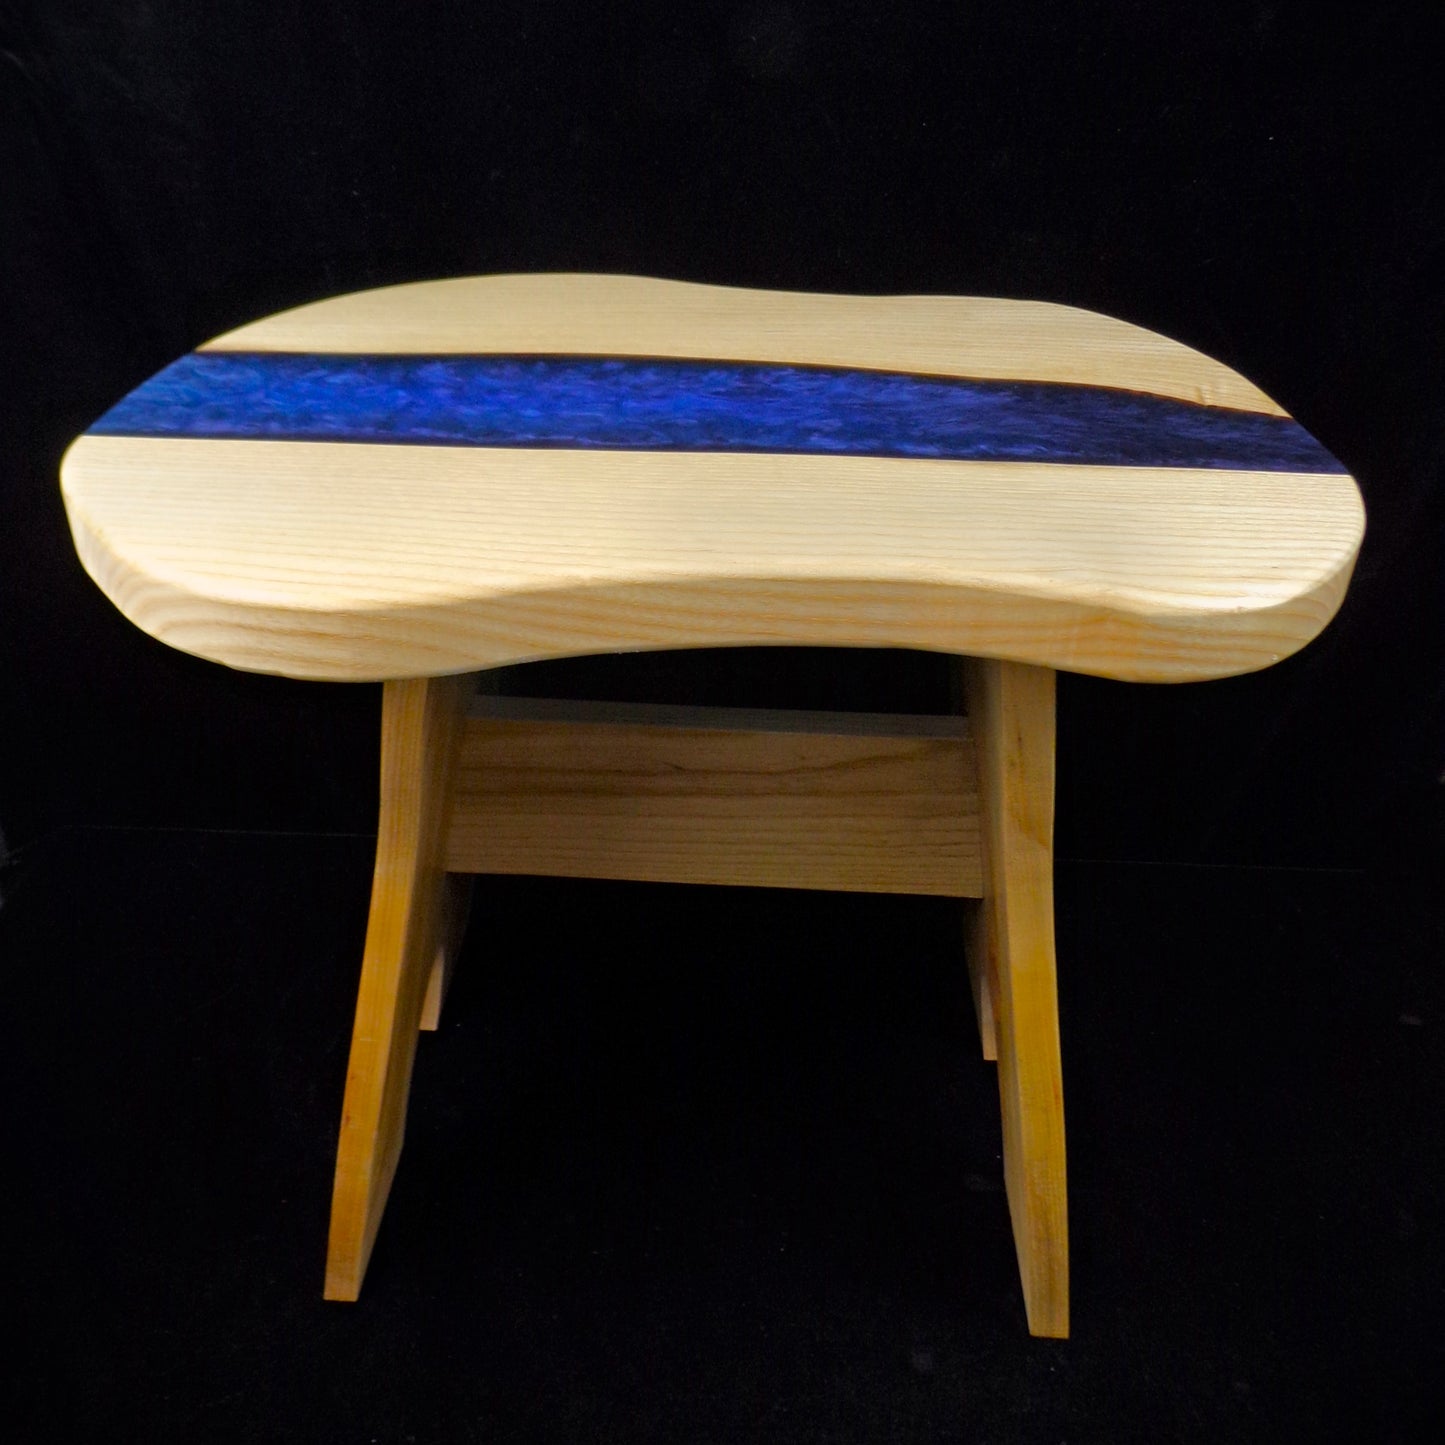 Wooden Stool with Blue Swirled Resin